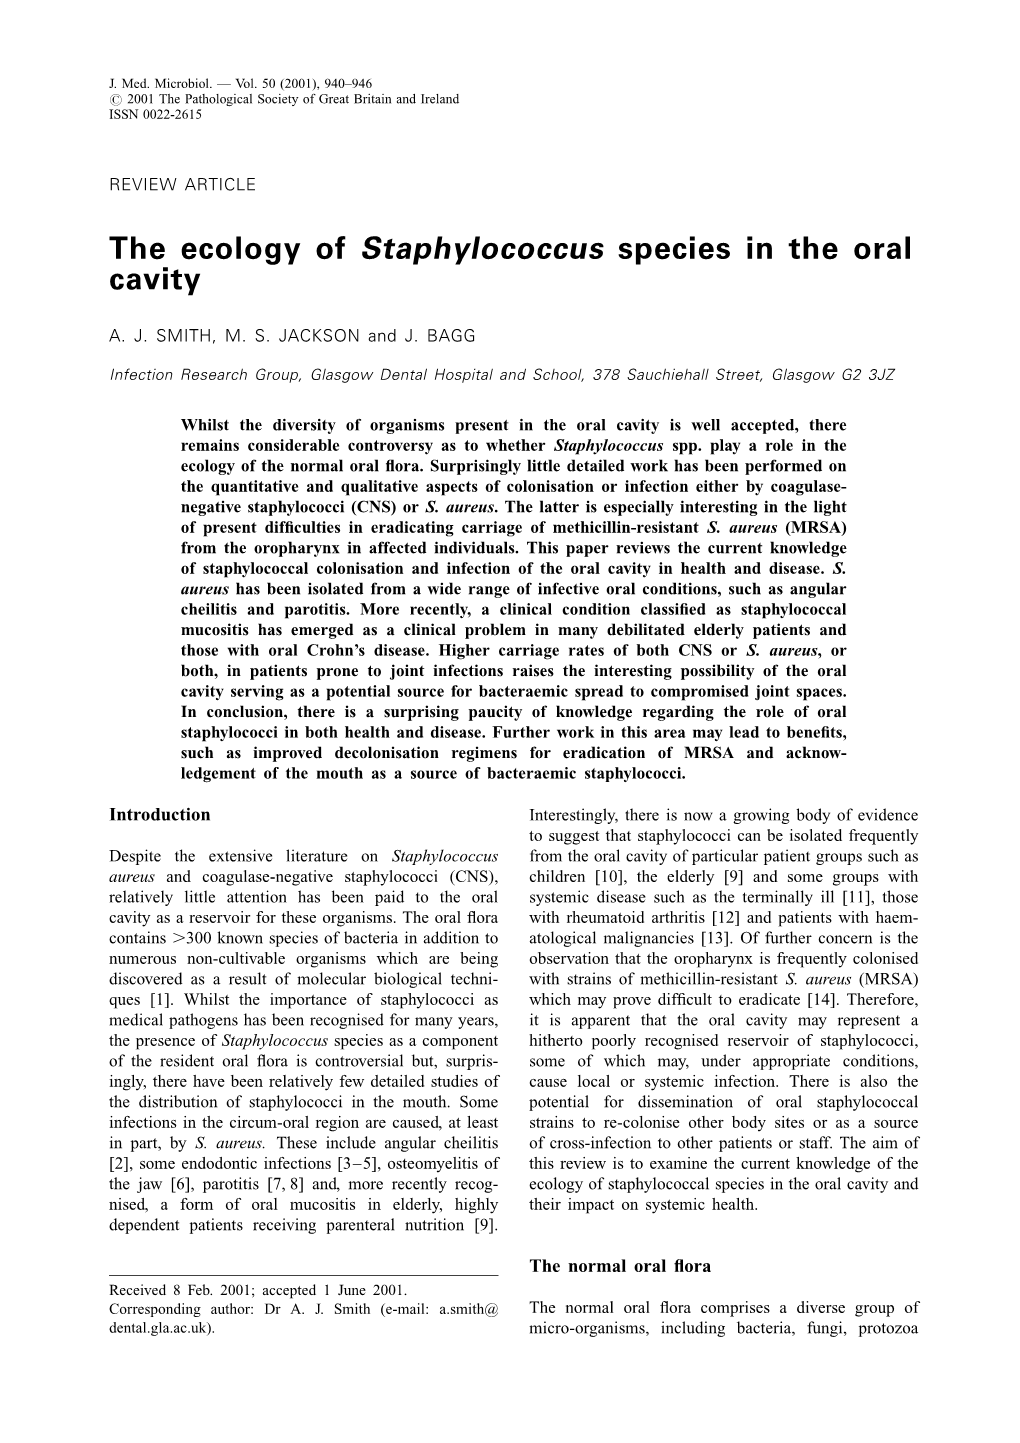 The Ecology of Staphylococcus Species in the Oral Cavity